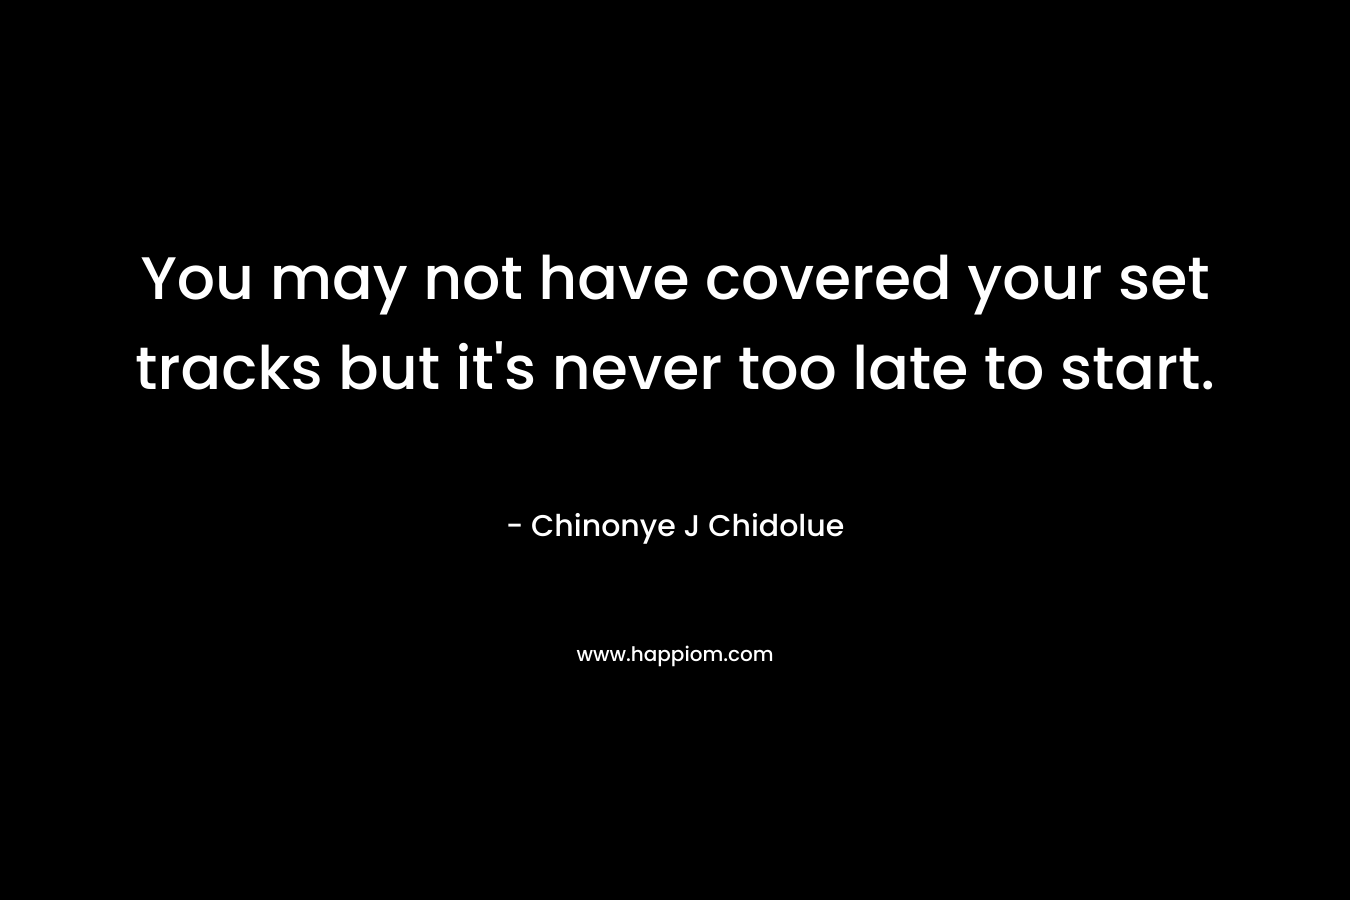 You may not have covered your set tracks but it’s never too late to start. – Chinonye J Chidolue